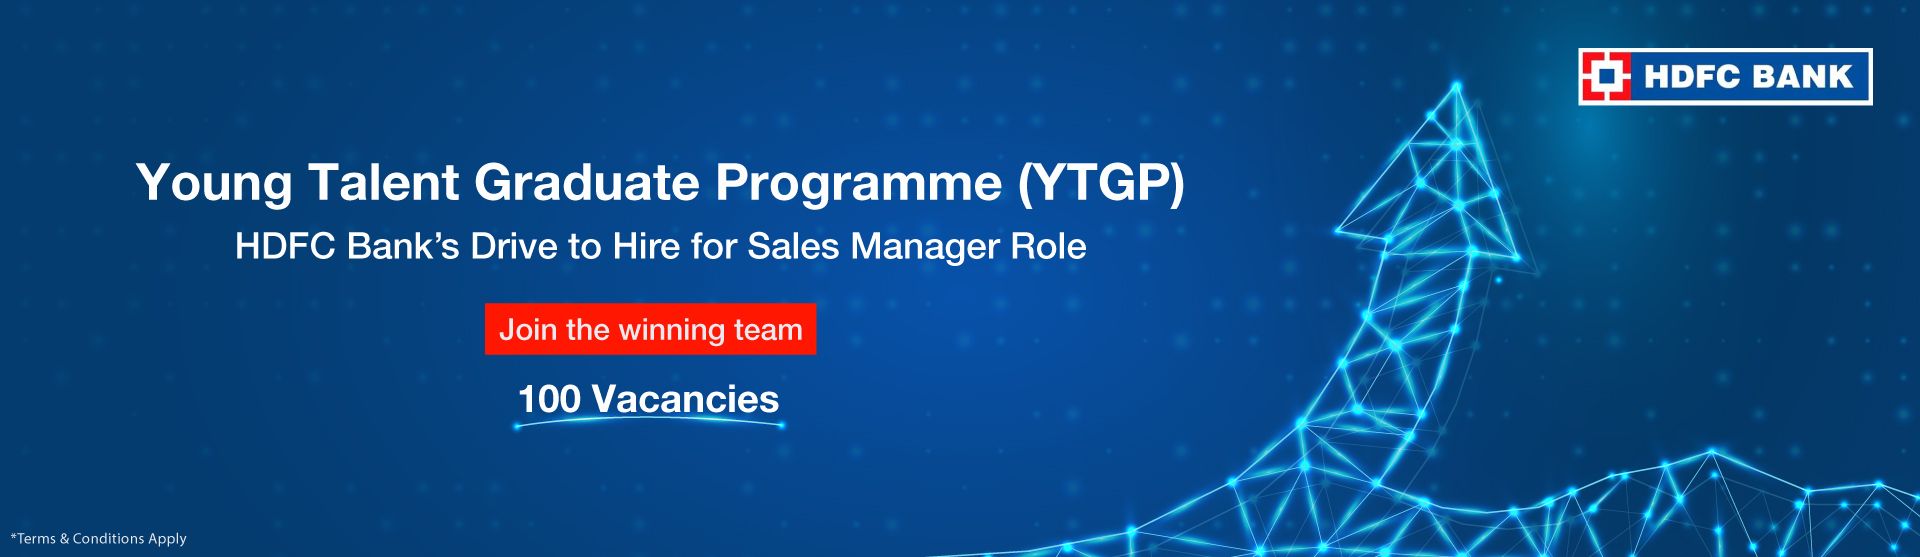 Young Talent Graduate Trainee Programme Ytgp By Hdfc Bank By Unstop Unstop 0130